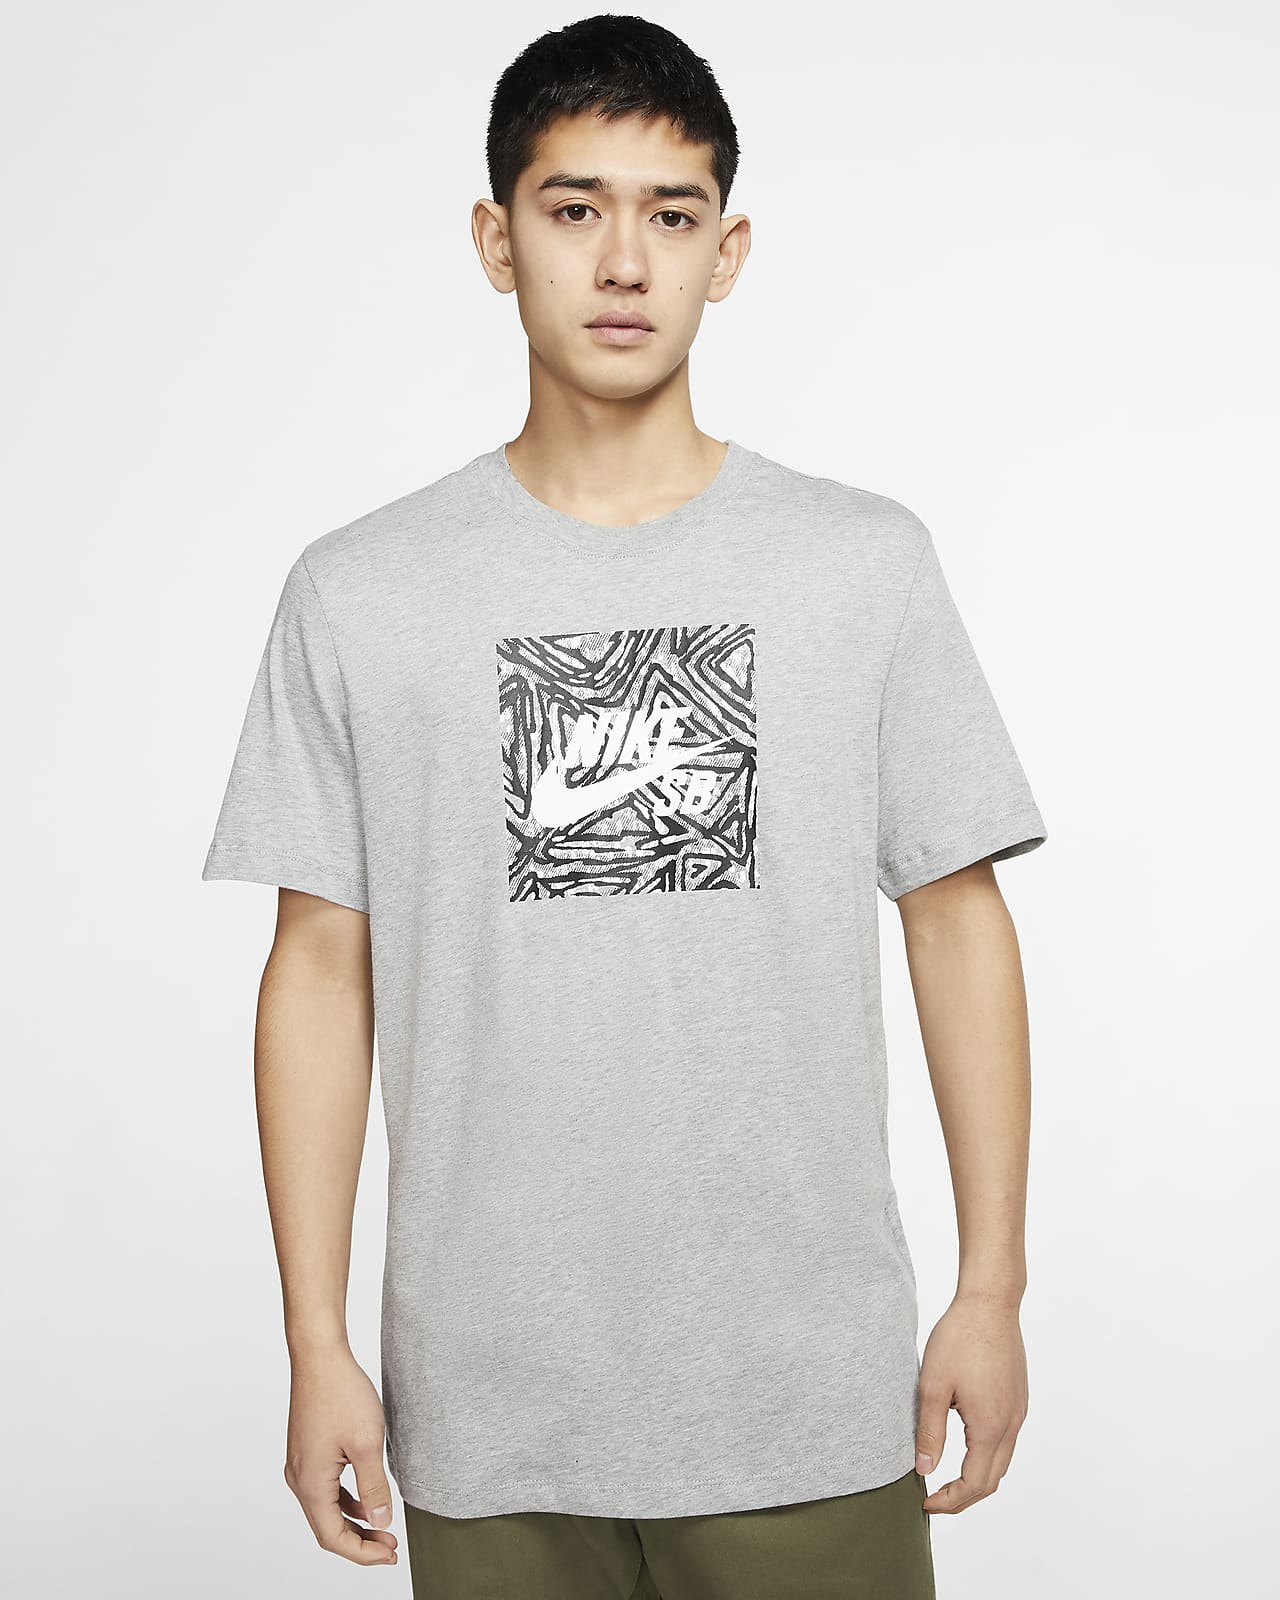 Nike Sb T Shirt Online Deals, UP TO 63% OFF | www 